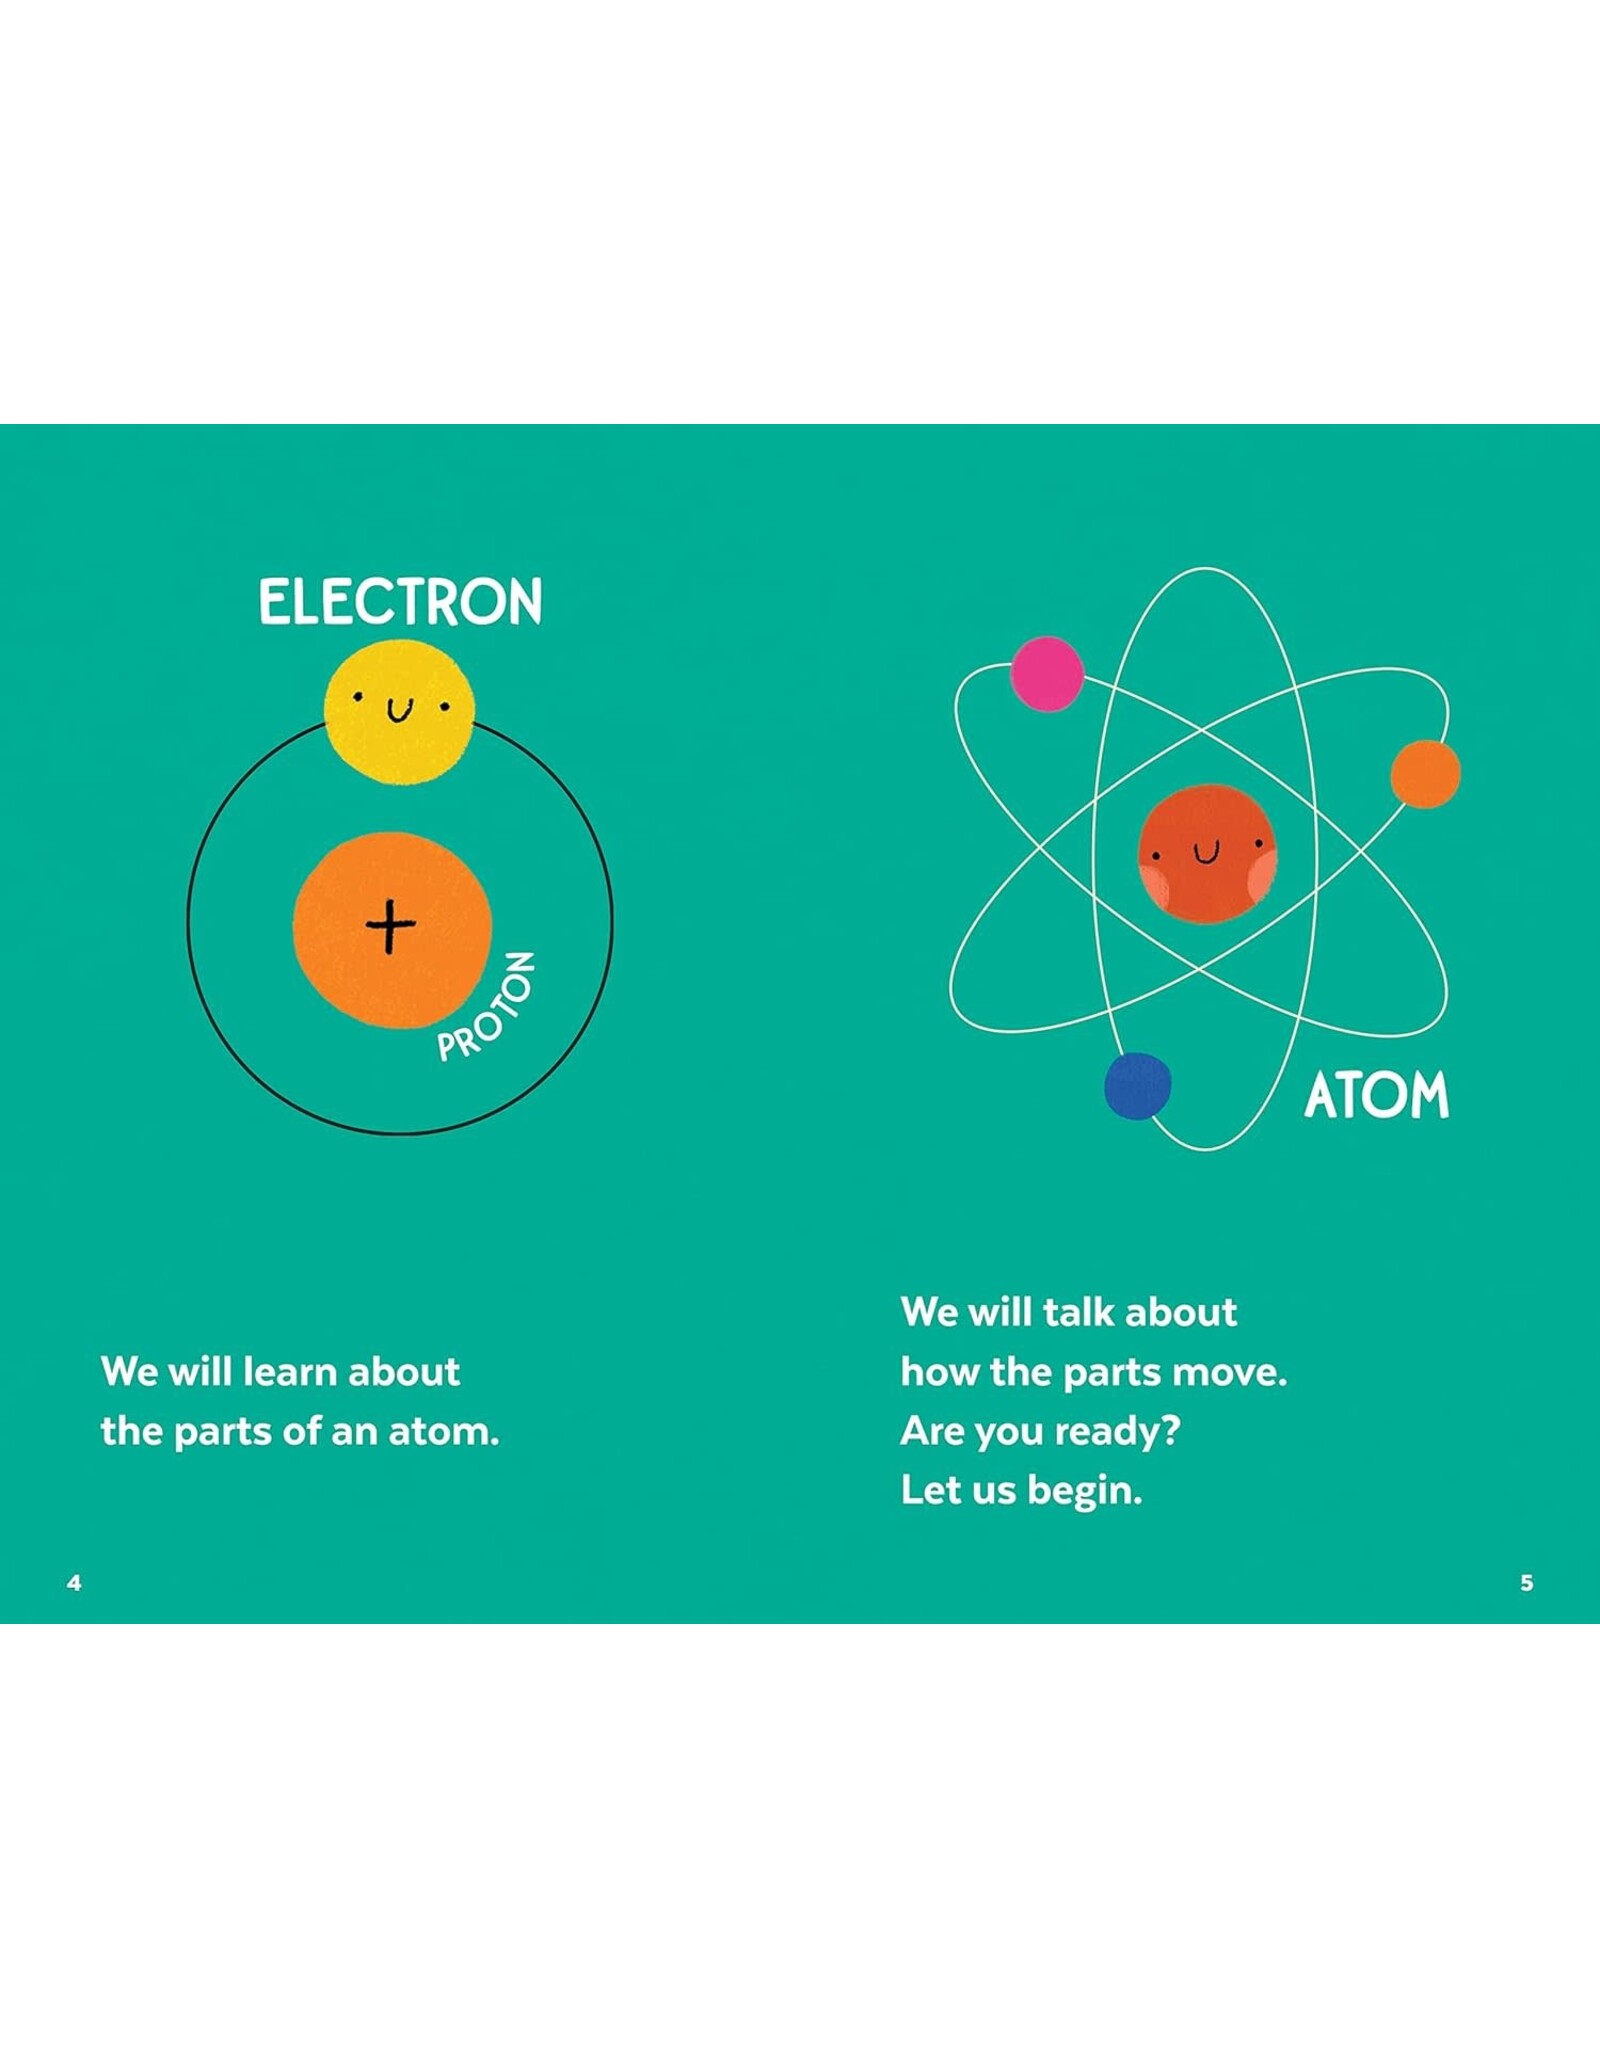 Brainy Science Readers: Do You Know Quantum Physics?